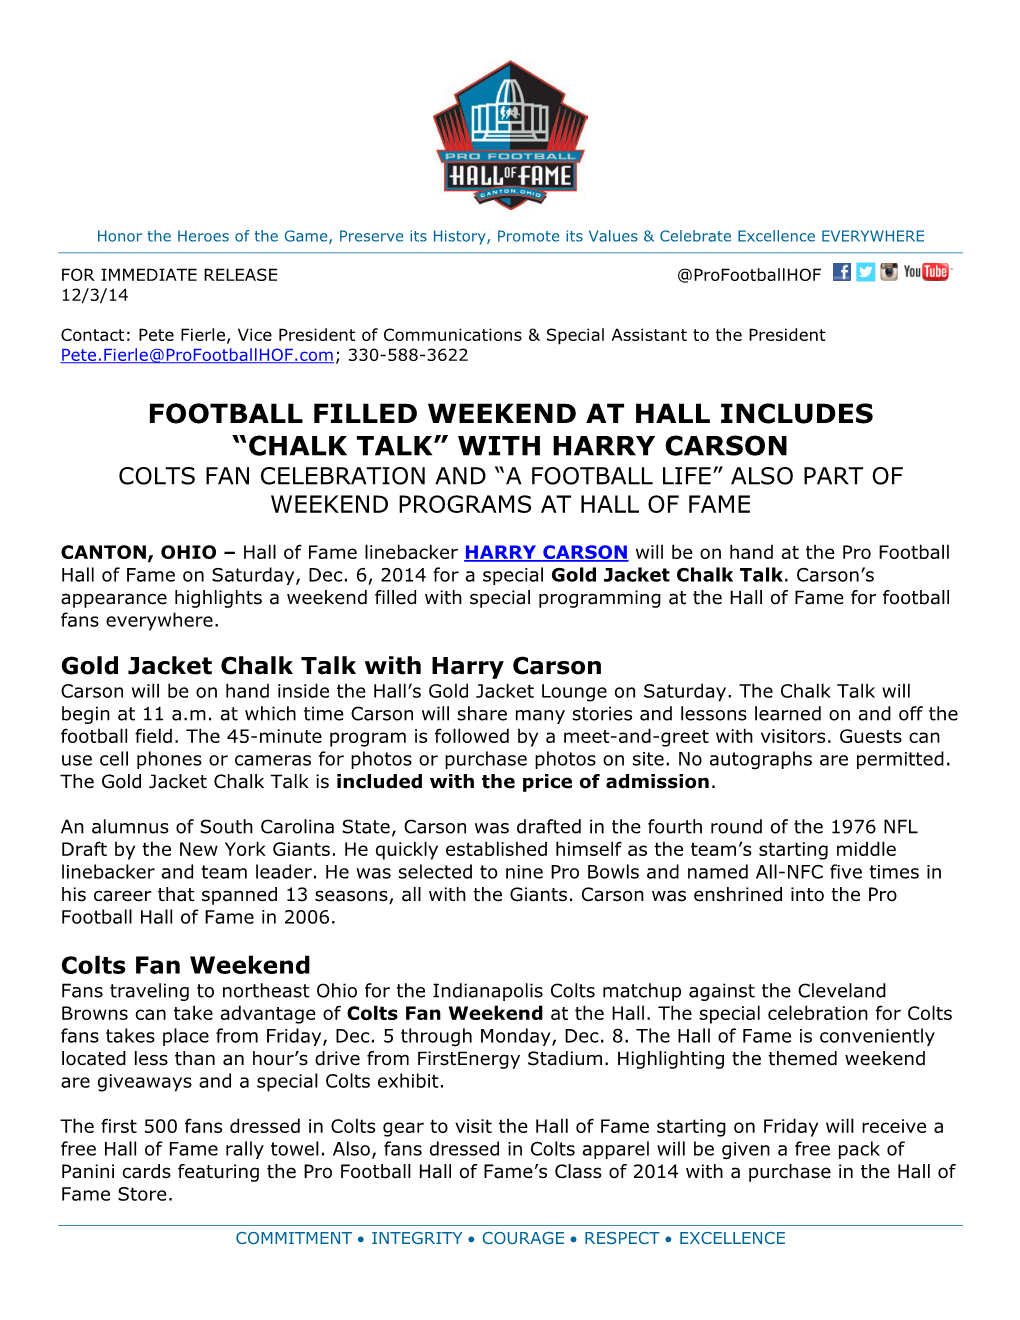 With Harry Carson Colts Fan Celebration and “A Football Life” Also Part of Weekend Programs at Hall of Fame